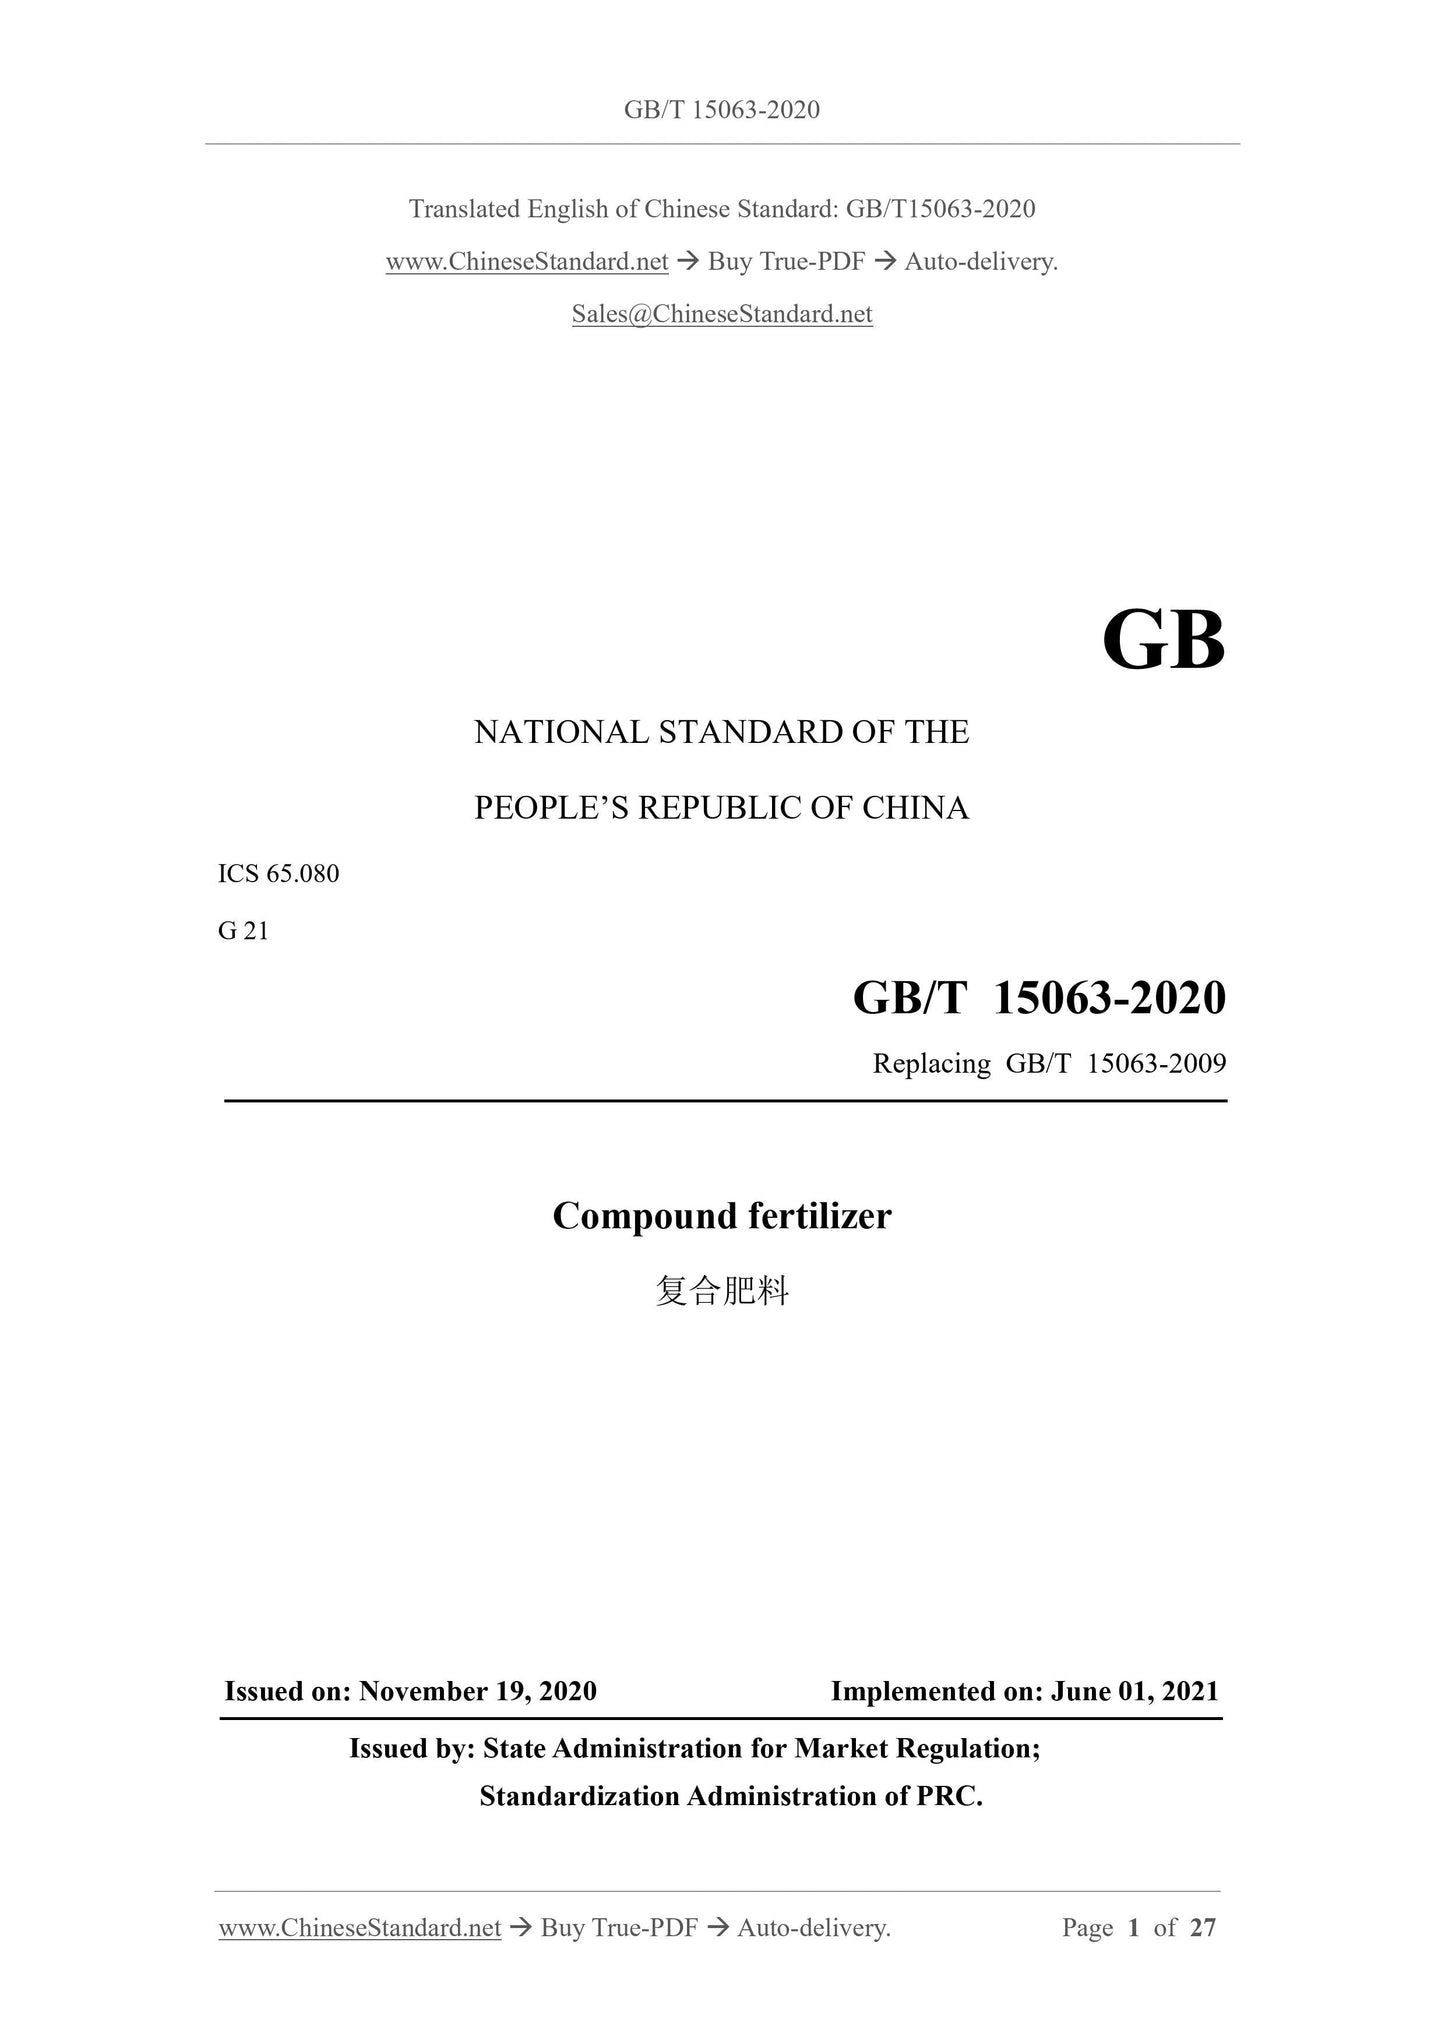 GB/T 15063-2020 Page 1